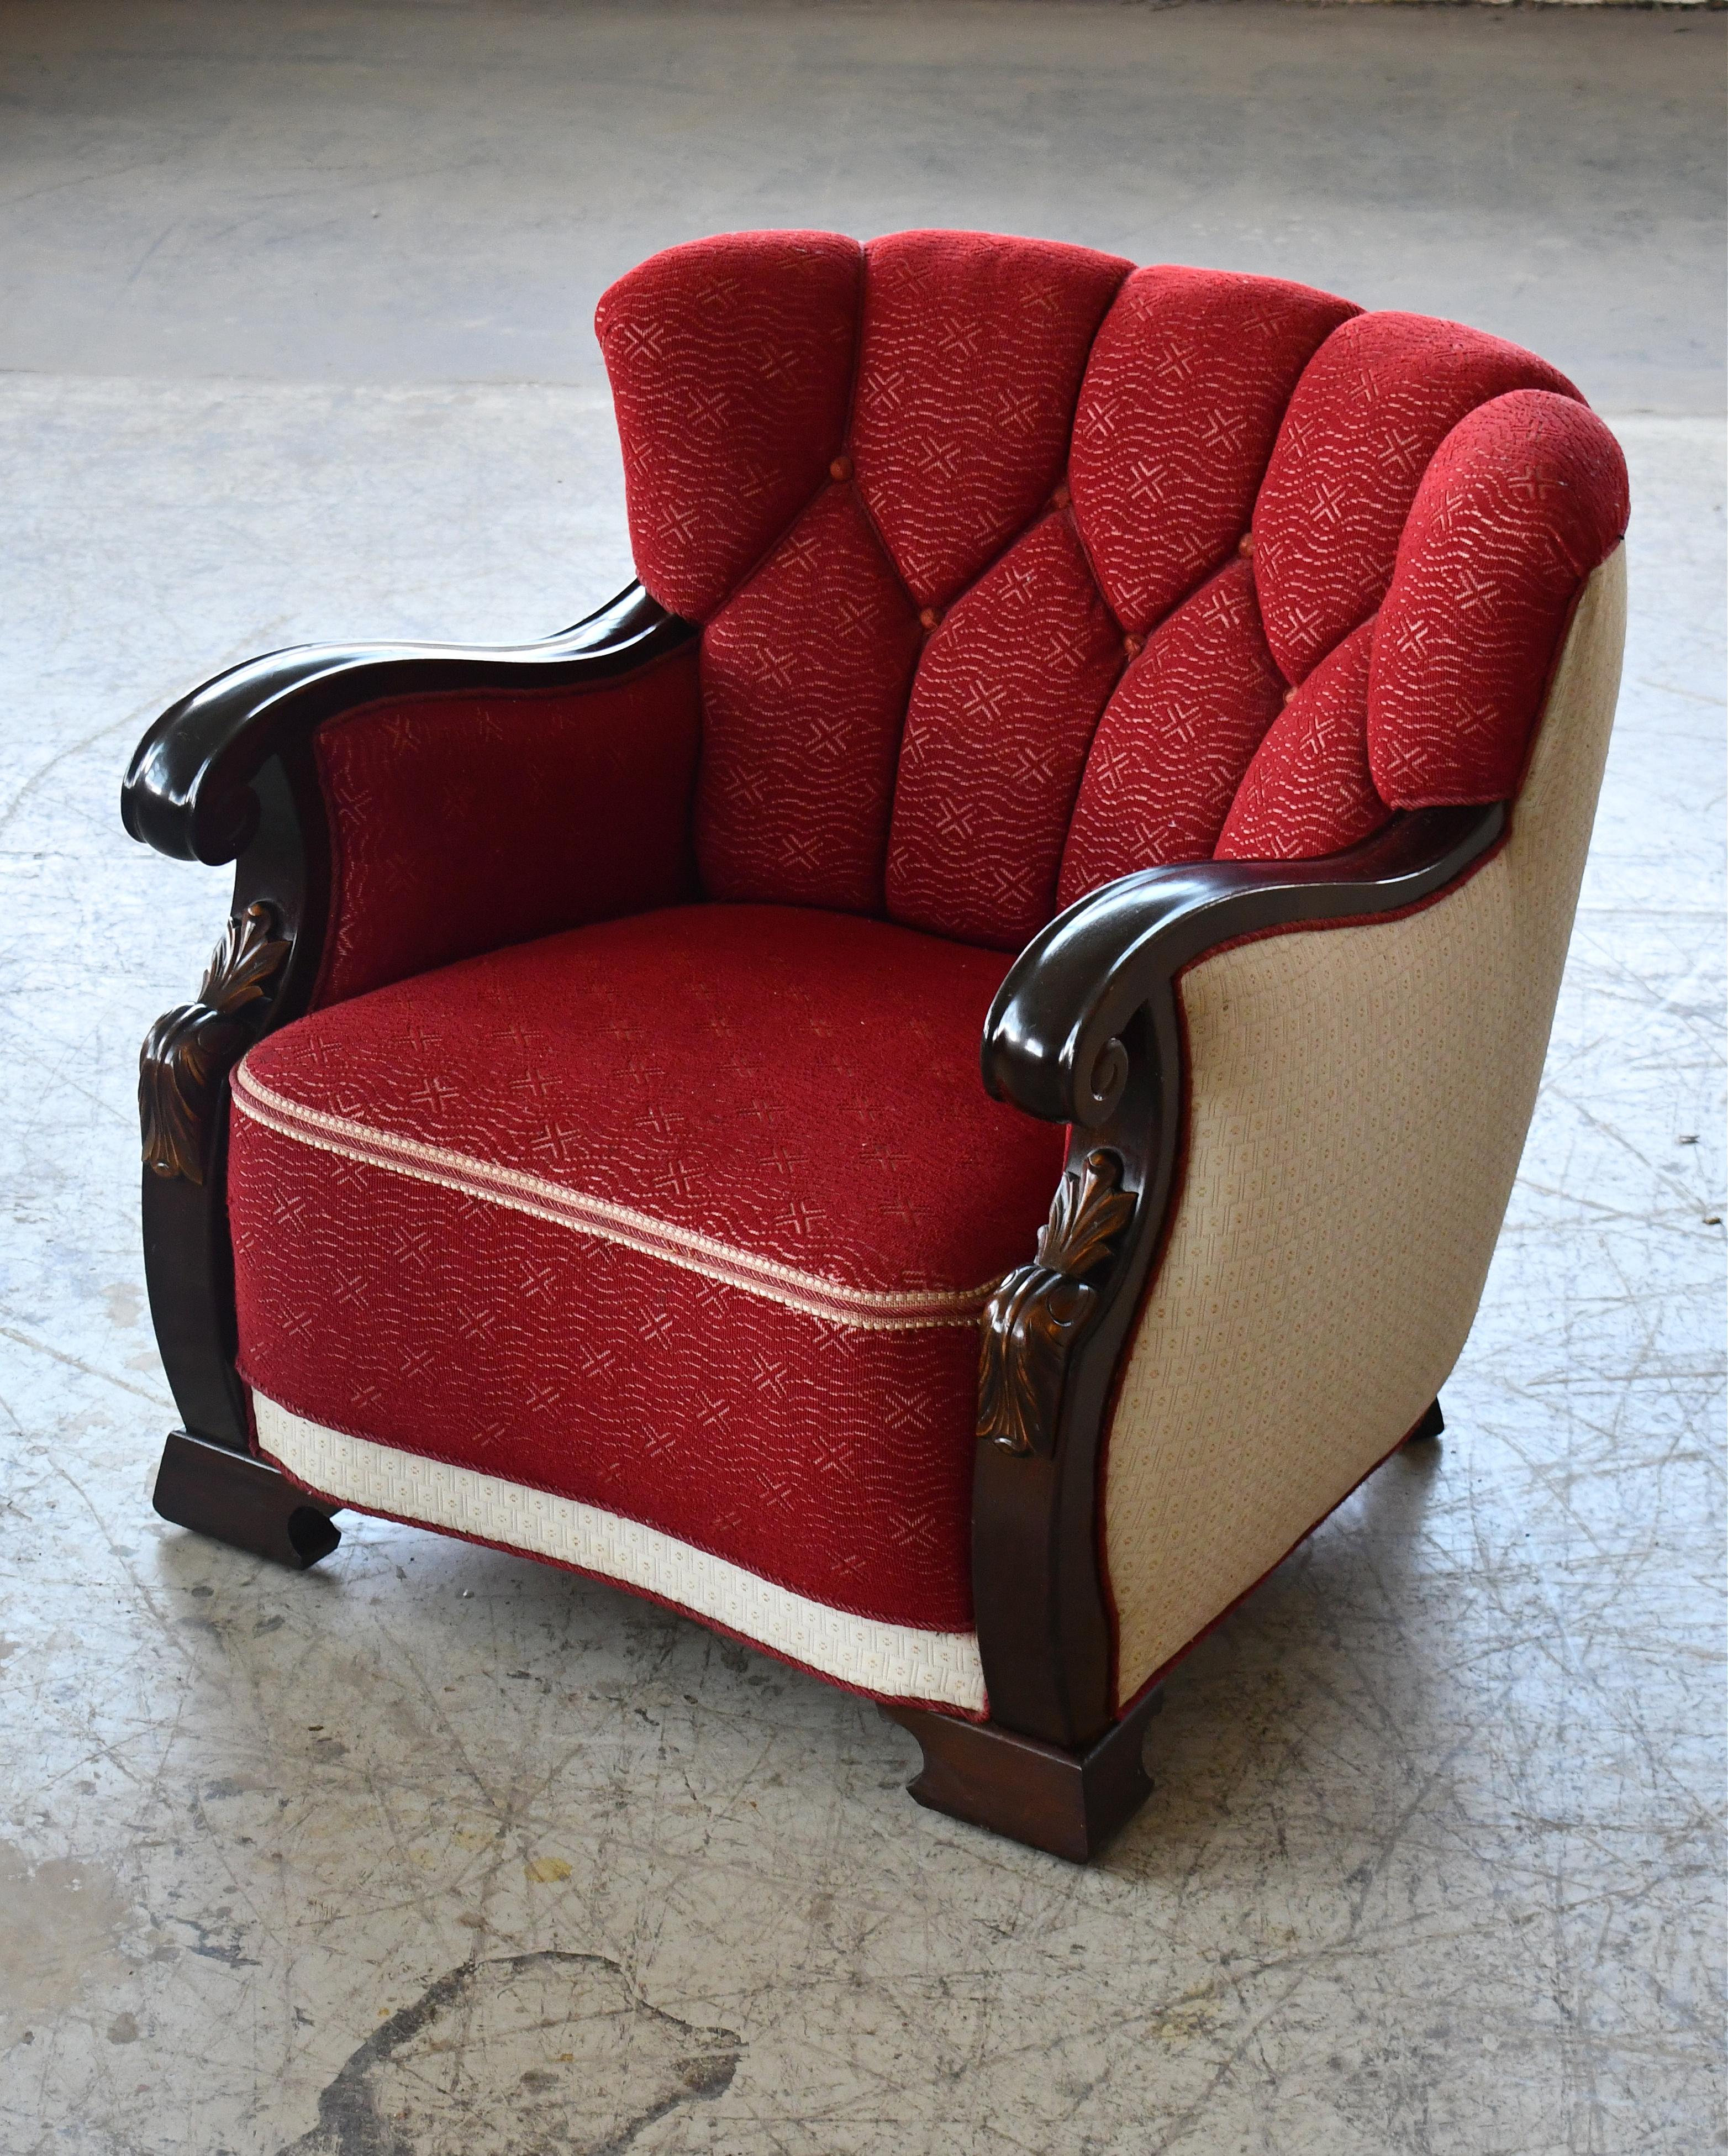 Mid-20th Century Danish Art Deco Club or Lounge Chairs with Carved Armrests 1930-40s For Sale